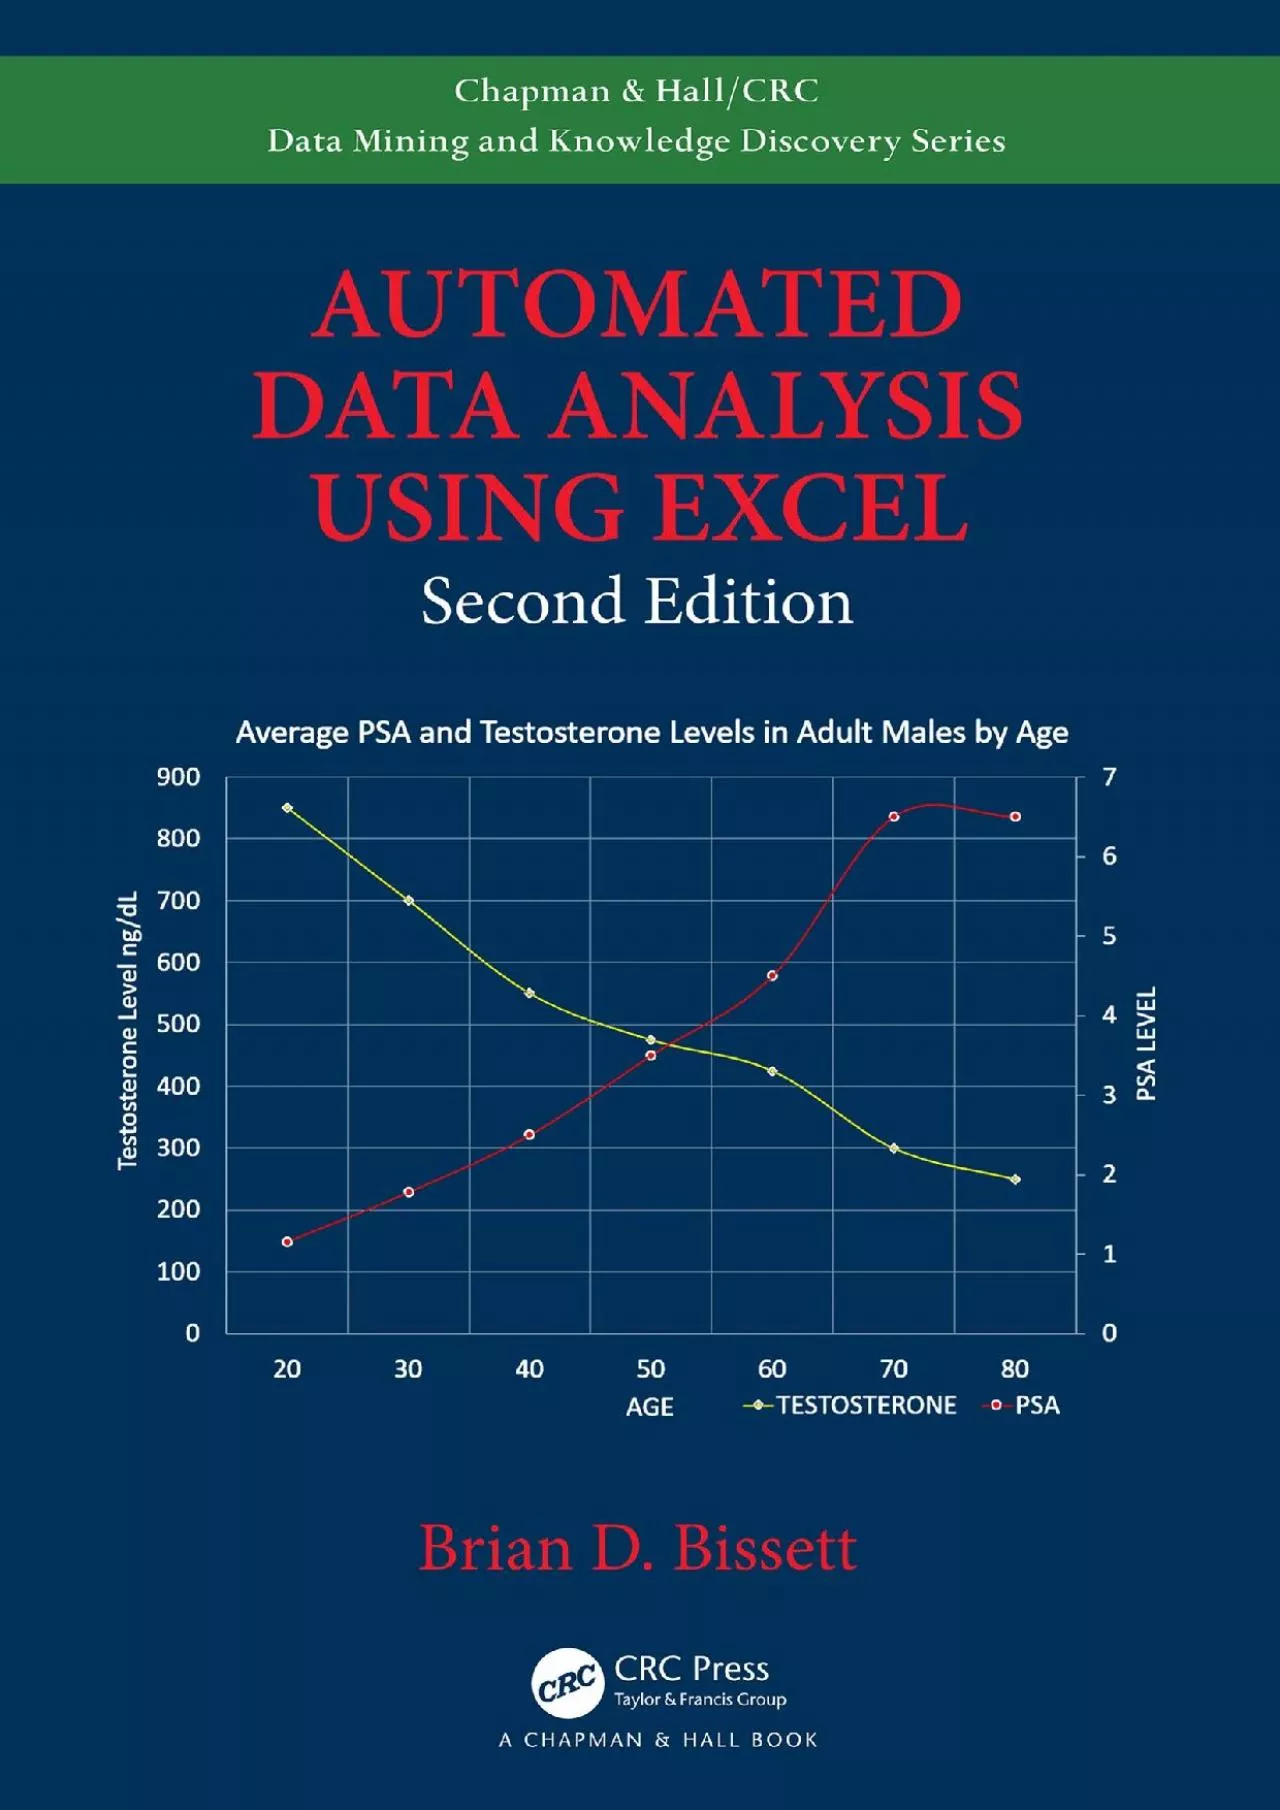 (BOOS)-Automated Data Analysis Using Excel (Chapman  Hall/CRC Data Mining and Knowledge